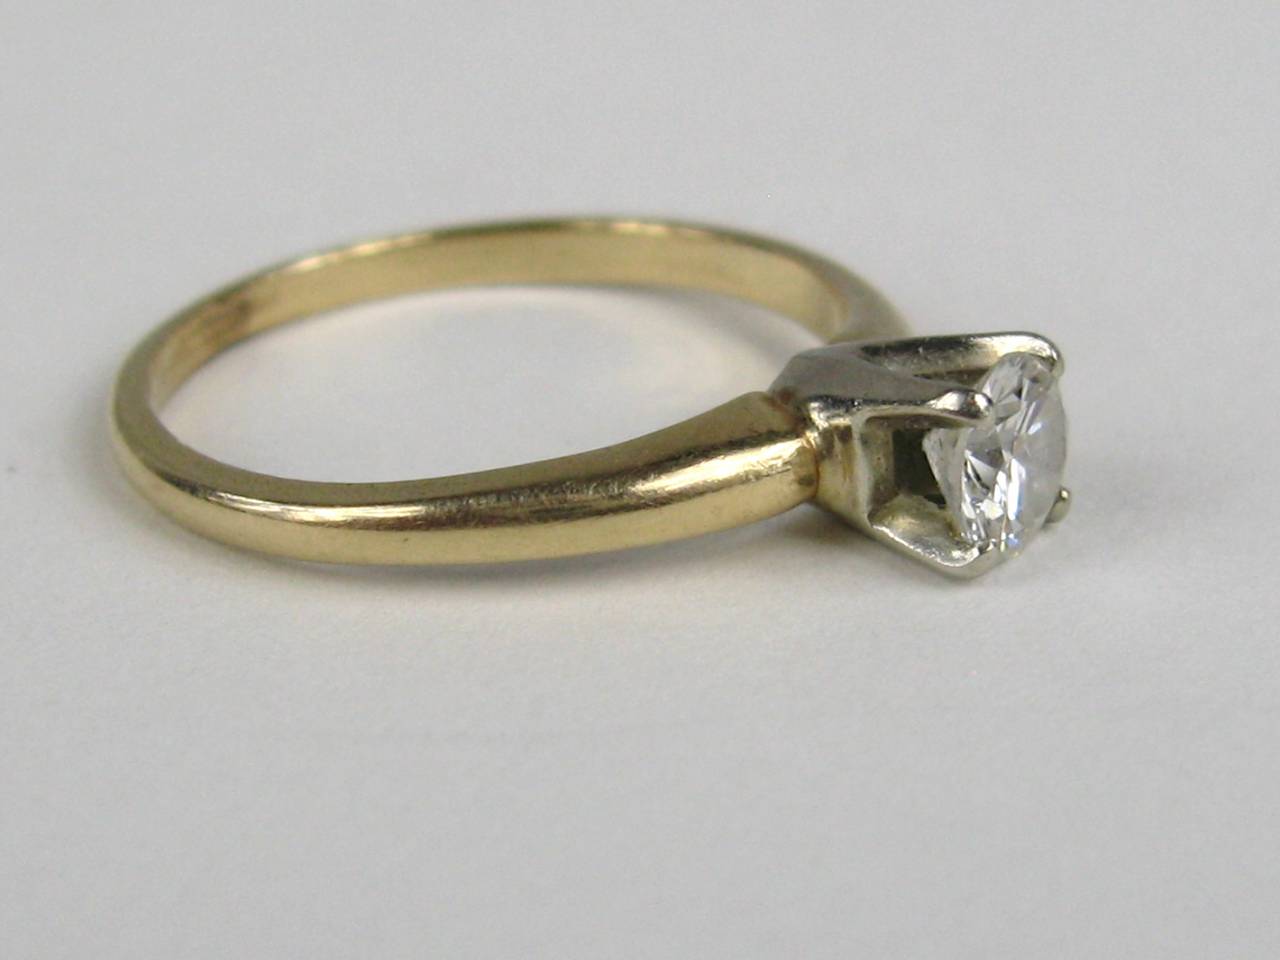 Solitaire Diamond set in 14K Yellow Gold with One Round Brilliant Cut Diamond that is a .50 Carat - SI-1 Color F-G and a Size 7.25 which can be sized by us or your jeweler. This is out of a massive collection of Contemporary designer clothing as